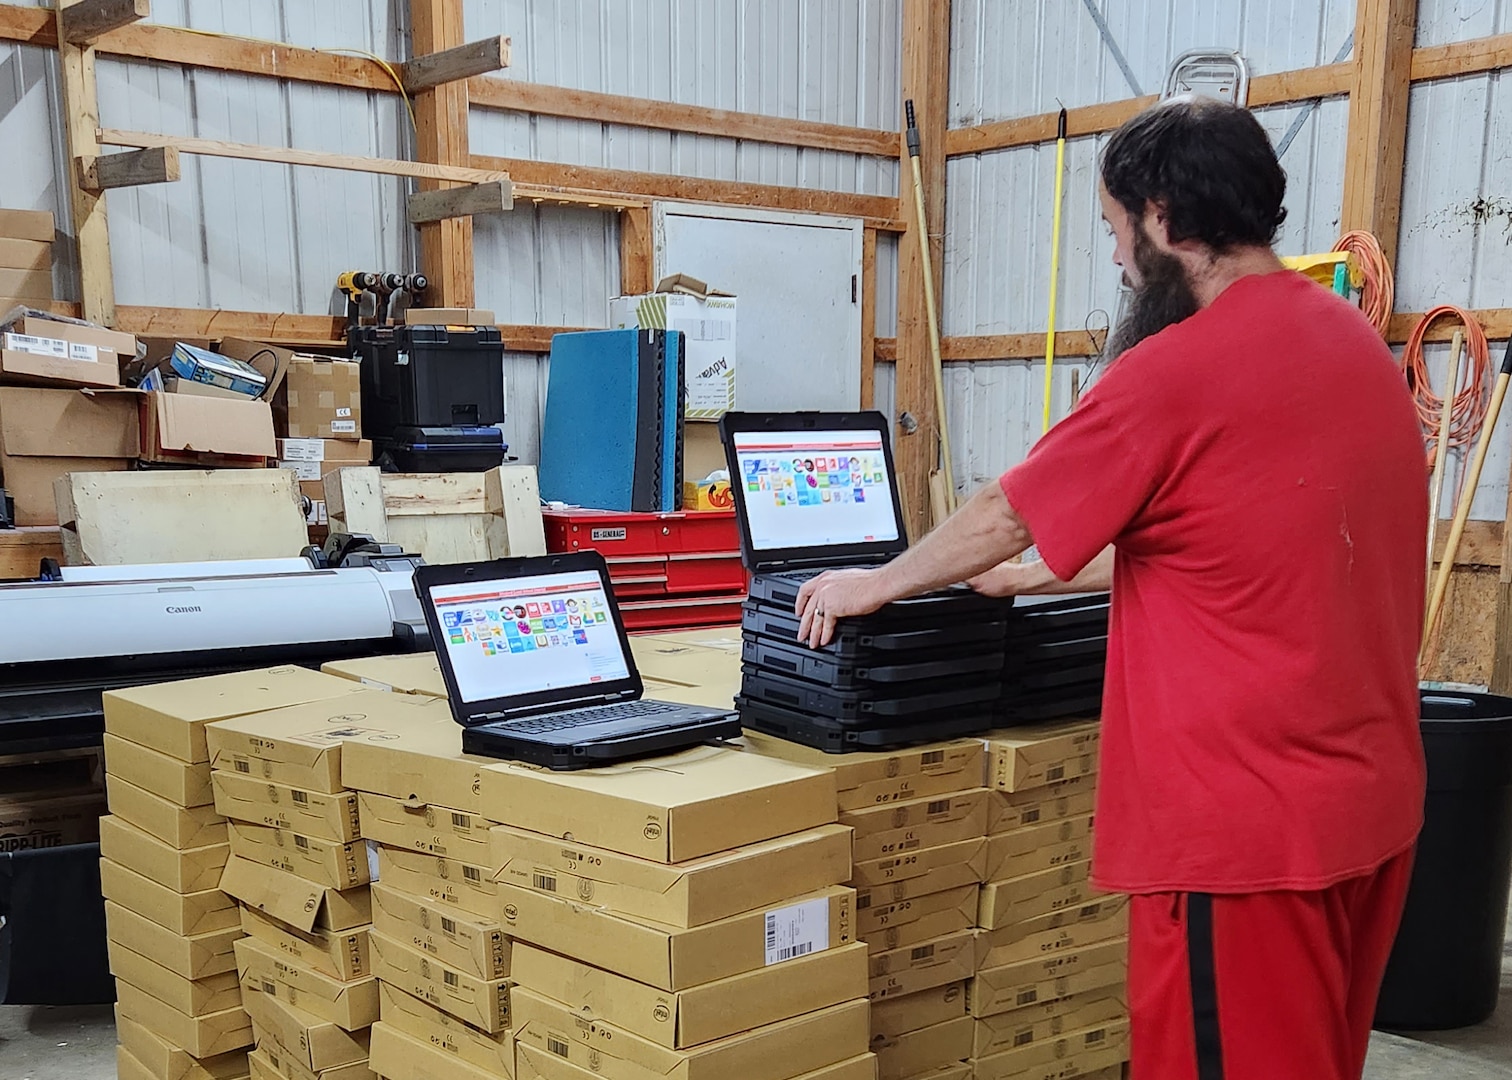 A man in a red shirt with his back to the camera stands looking at two operating and open laptop computers. They are setting on a large stack of brown boxes that look like they may contain laptops as well.